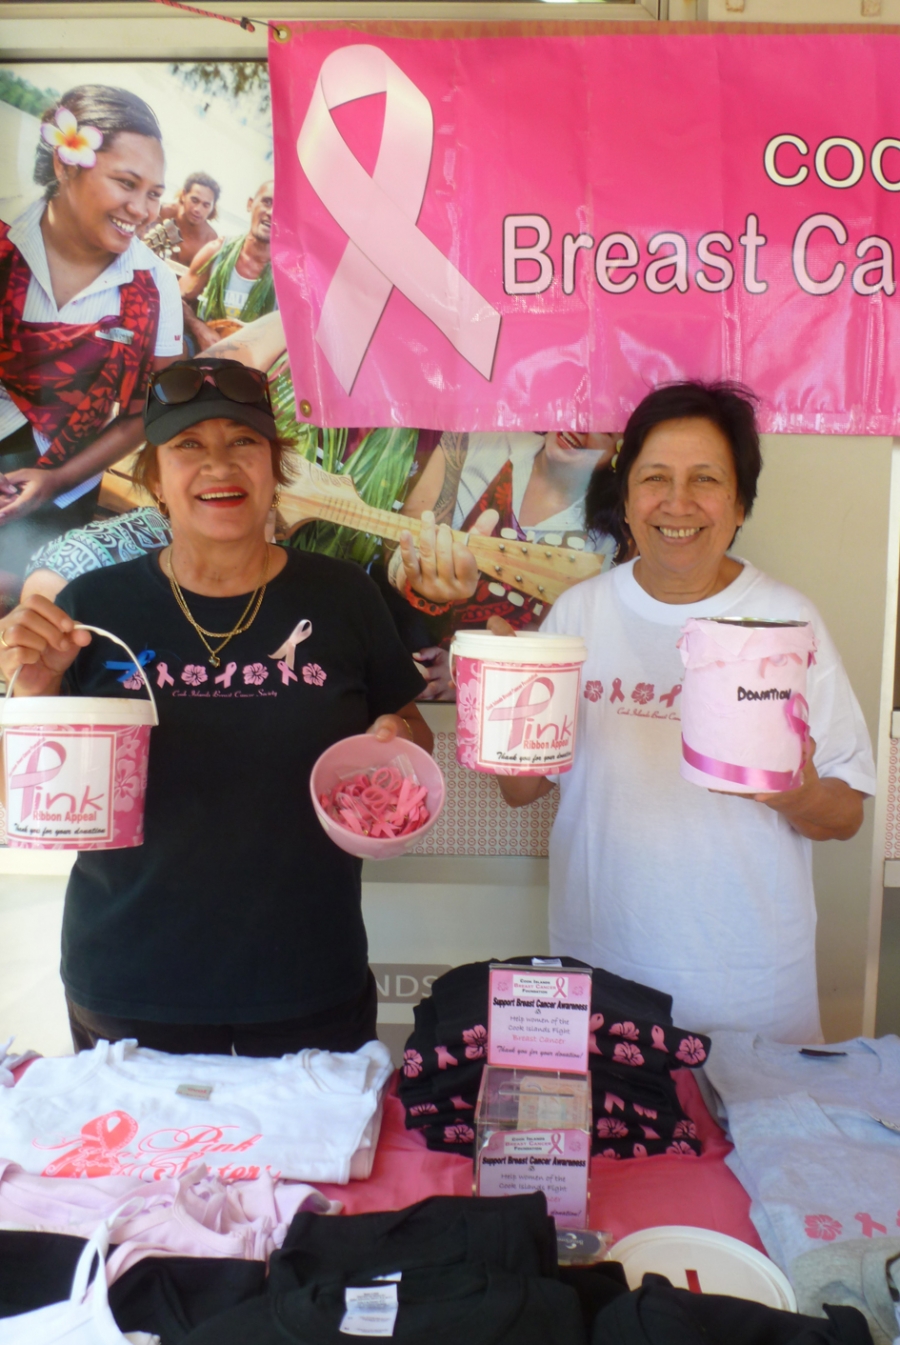 Visible community support for breast cancer awareness